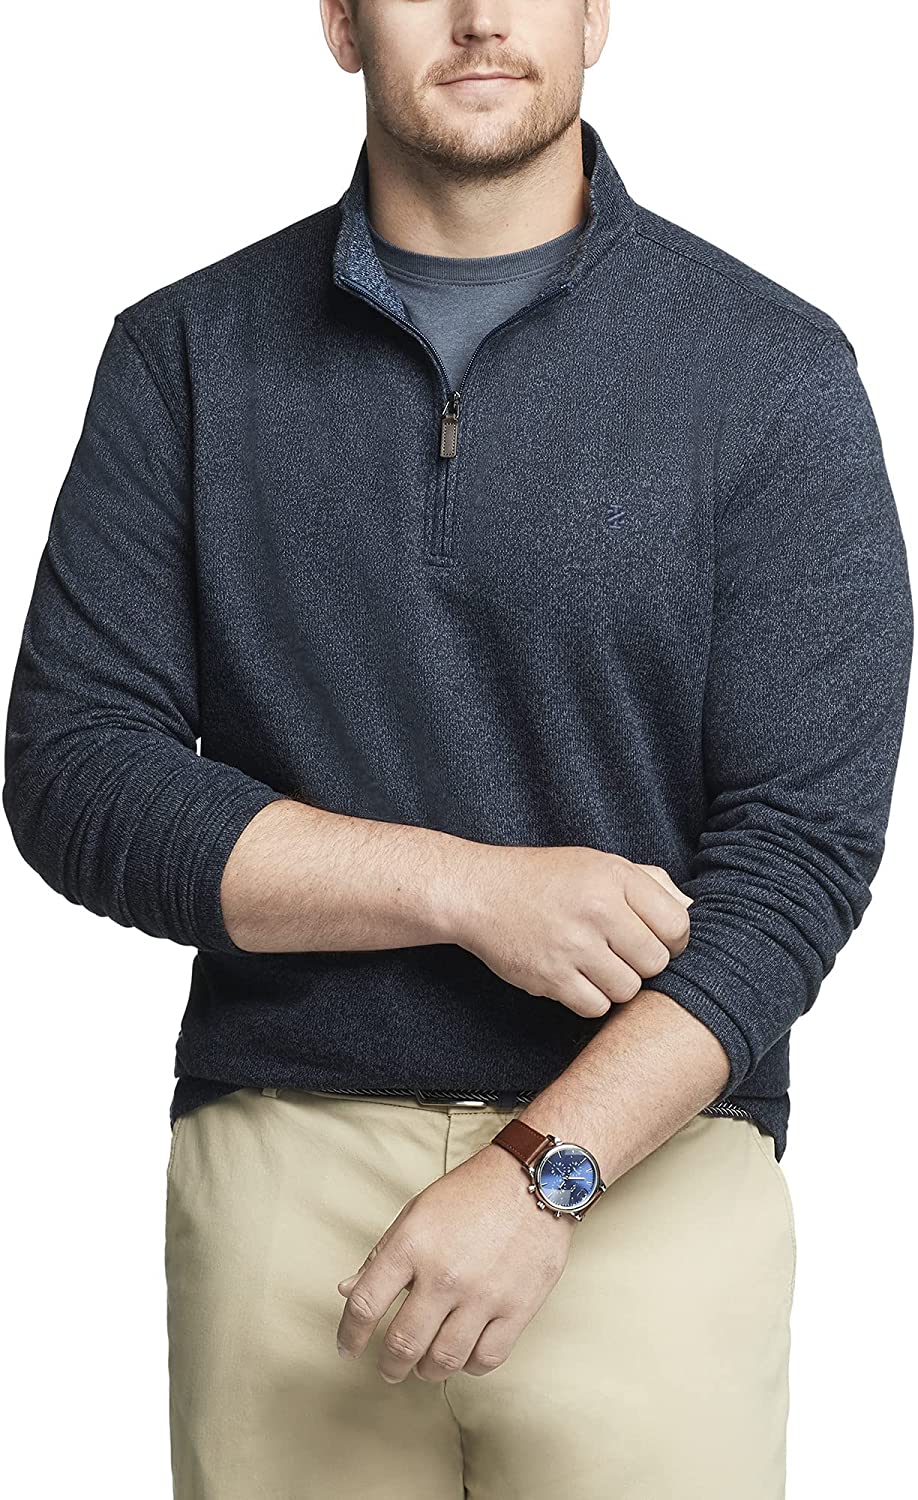 A formal winter shirt in distinctive colors from IZOD